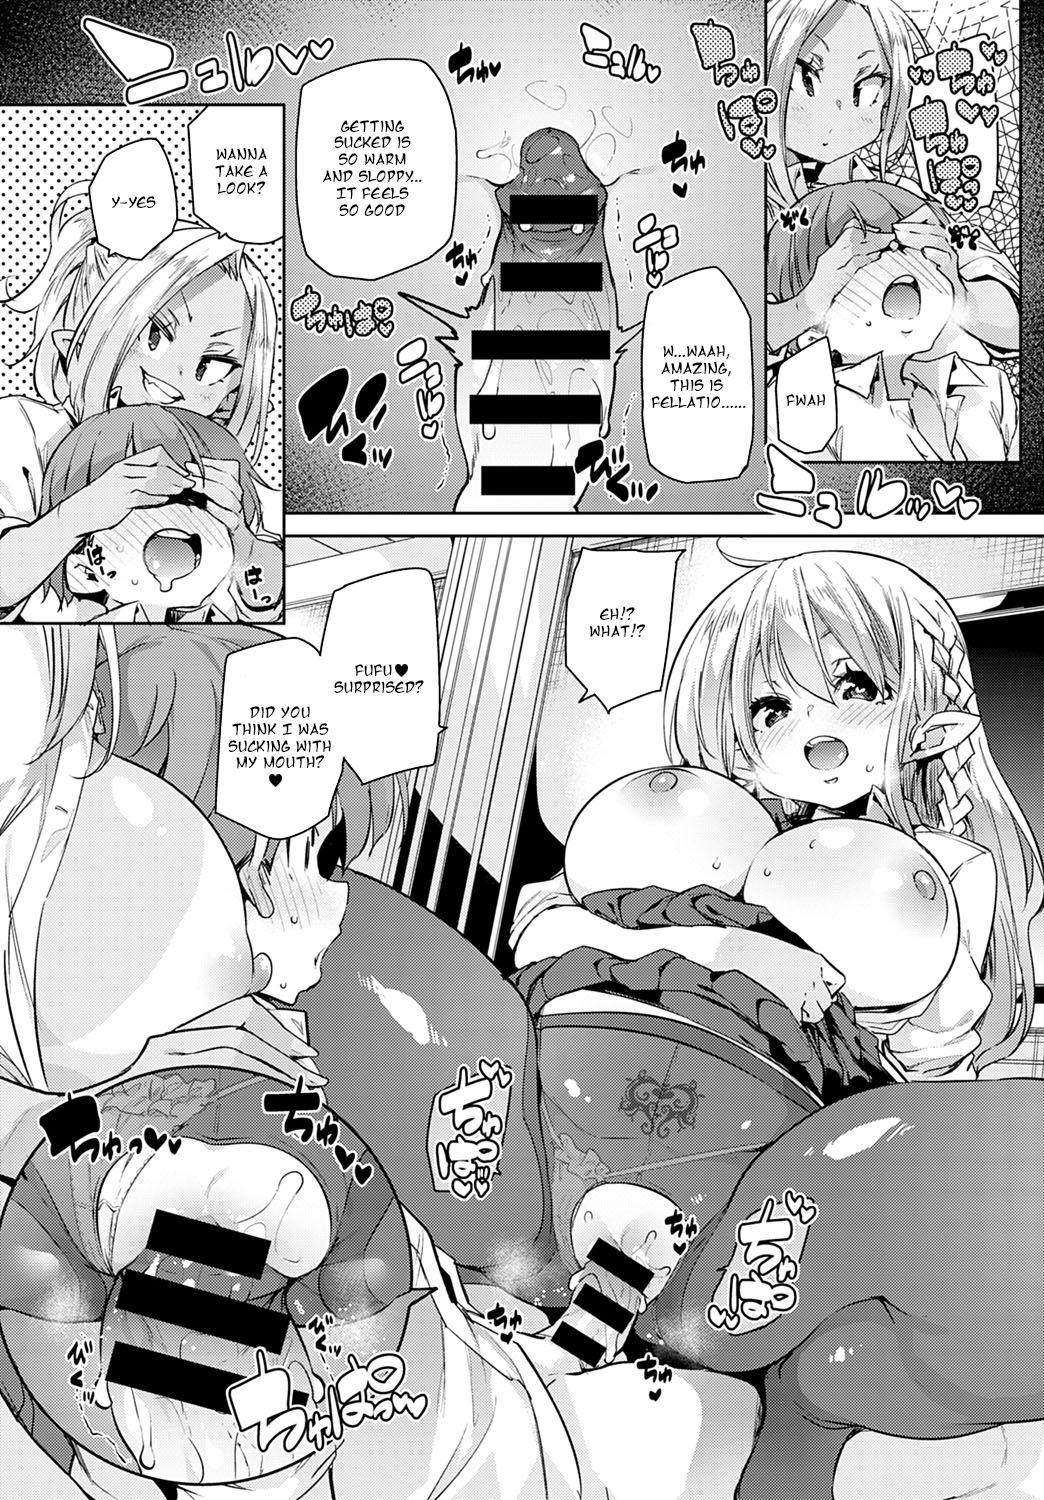 Tight Cunt 100-kai Jusei Dekiru kana? | Is it possible to cum 100 times? Real Amature Porn - Page 8